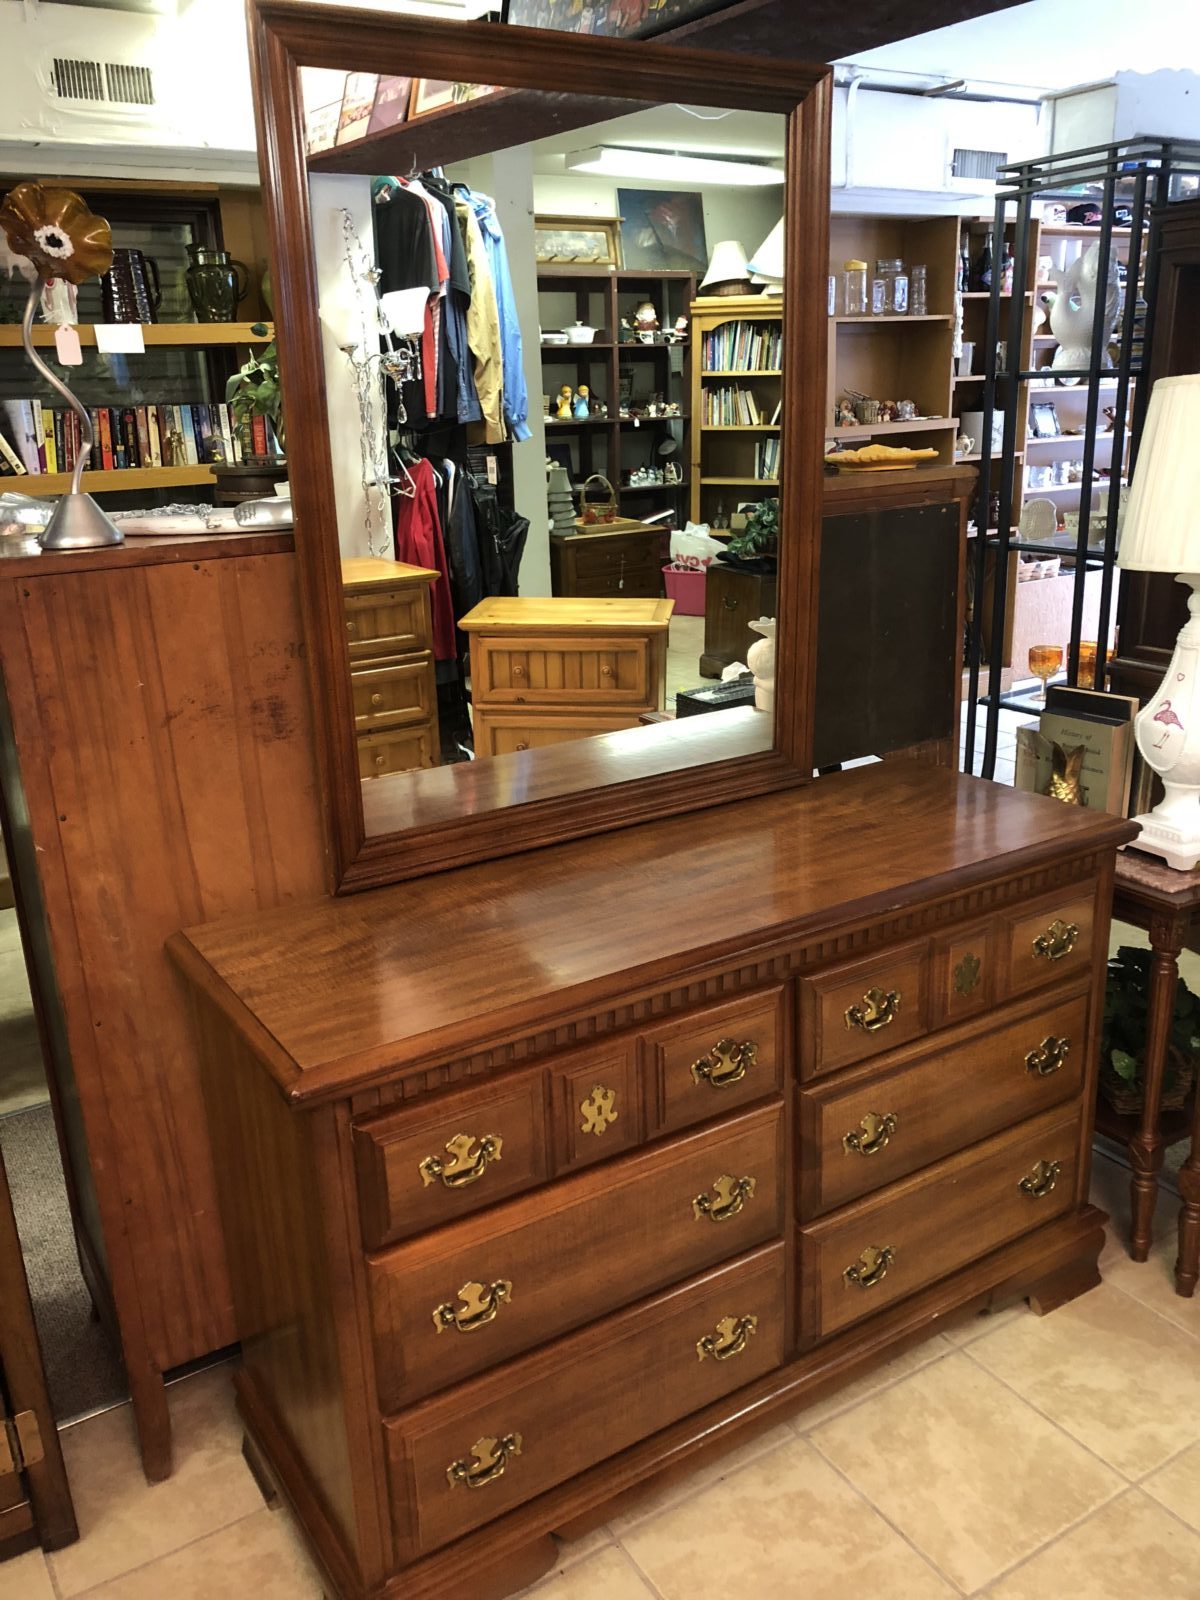 Bassett Dresser with Mirror • Bassett Dresser with Mirror in excellent condition. Has dove tailed Drawers.